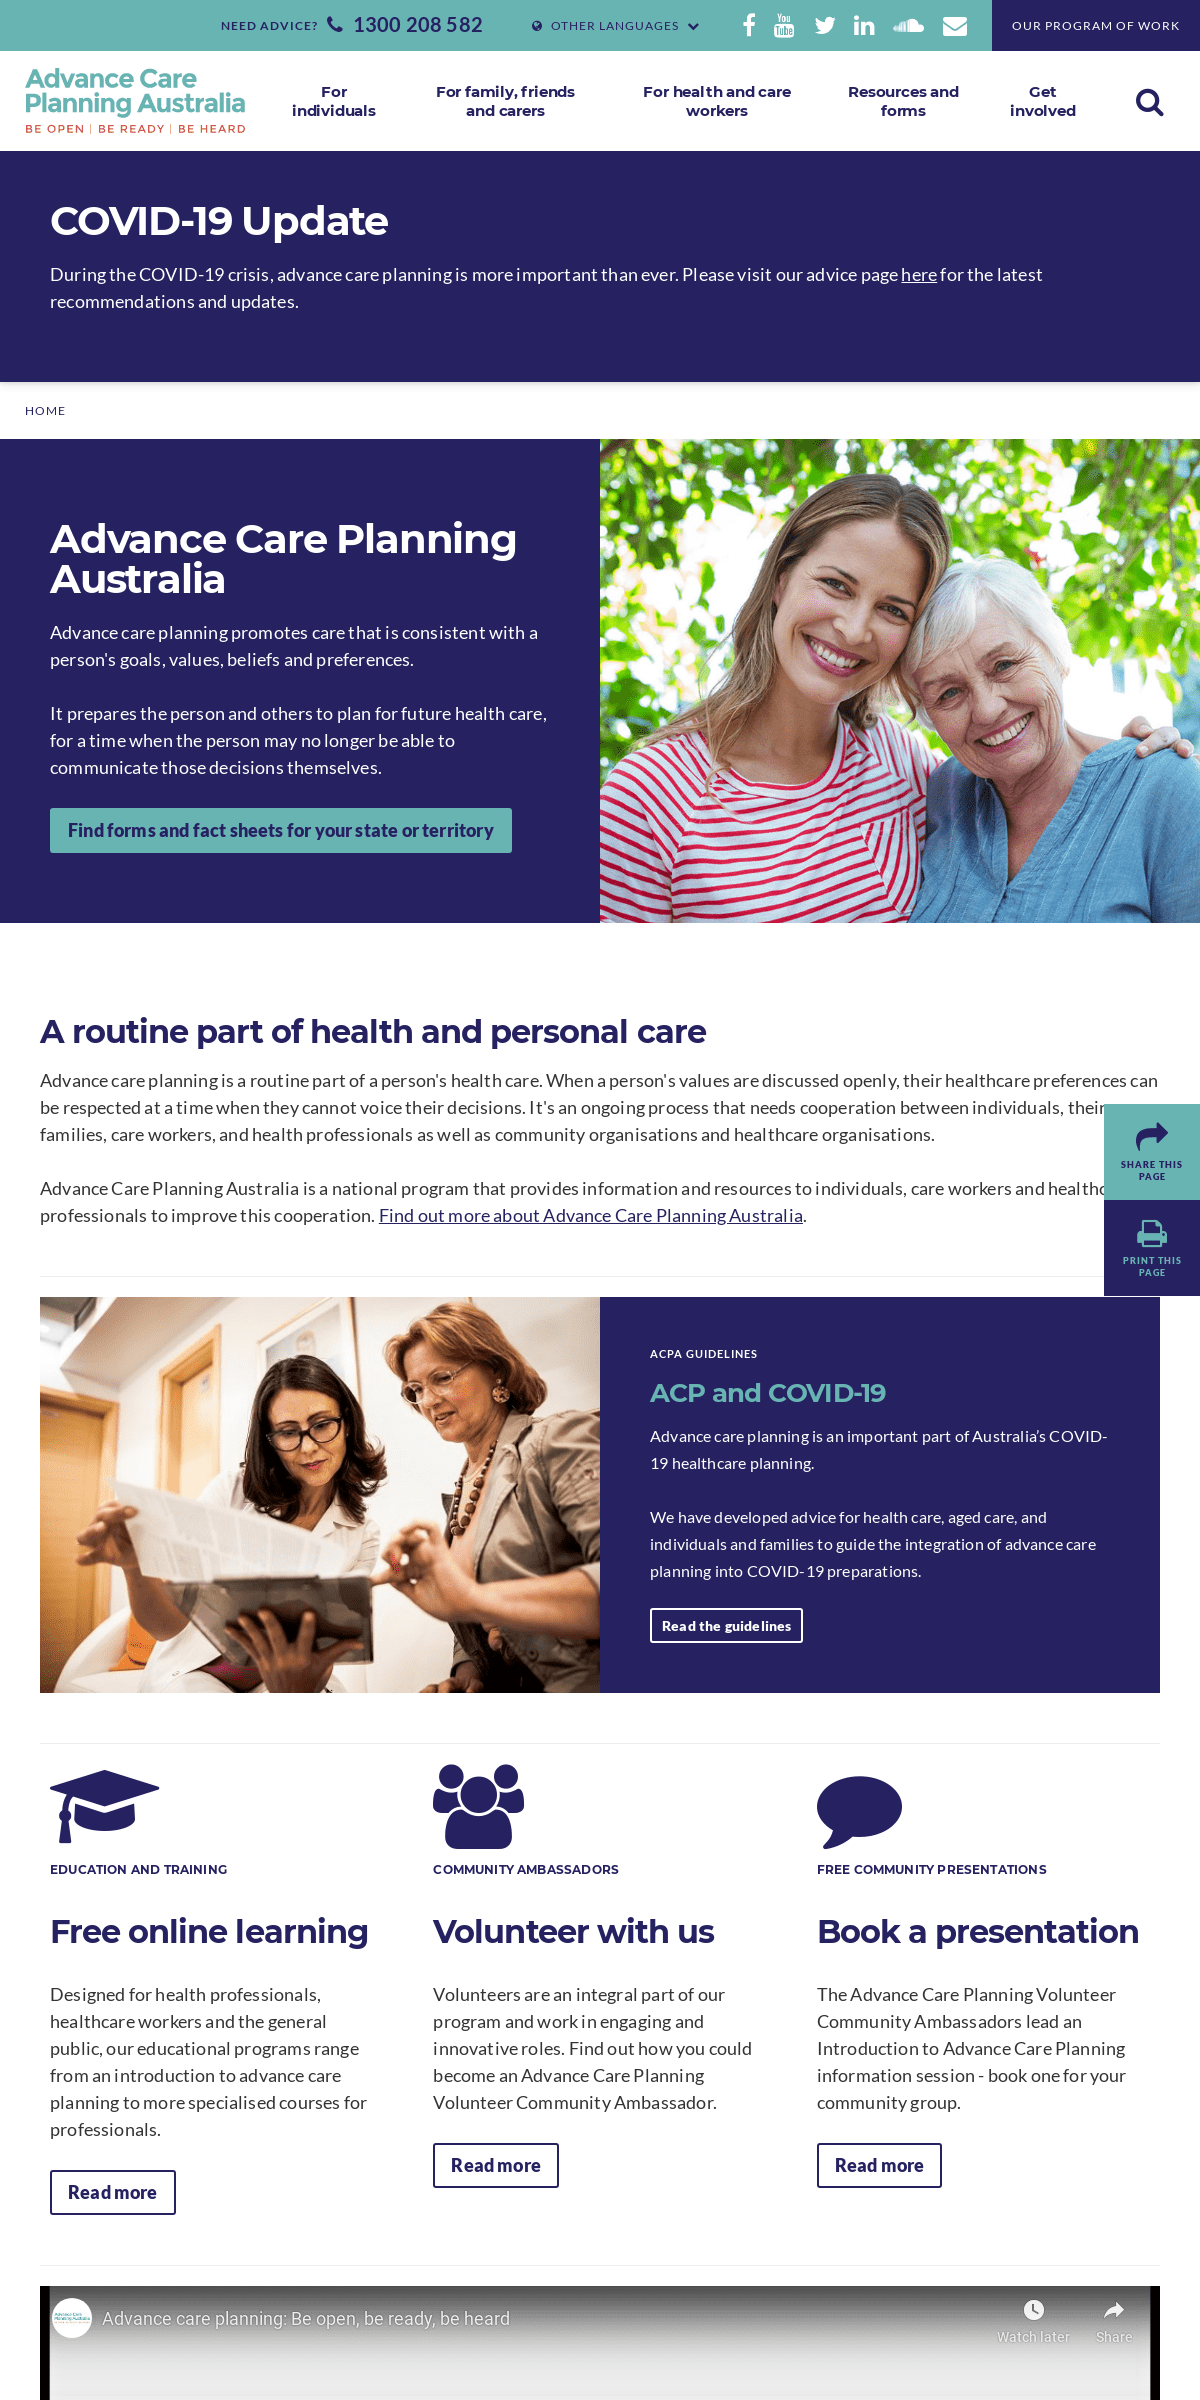 A complete backup of advancecareplanning.org.au